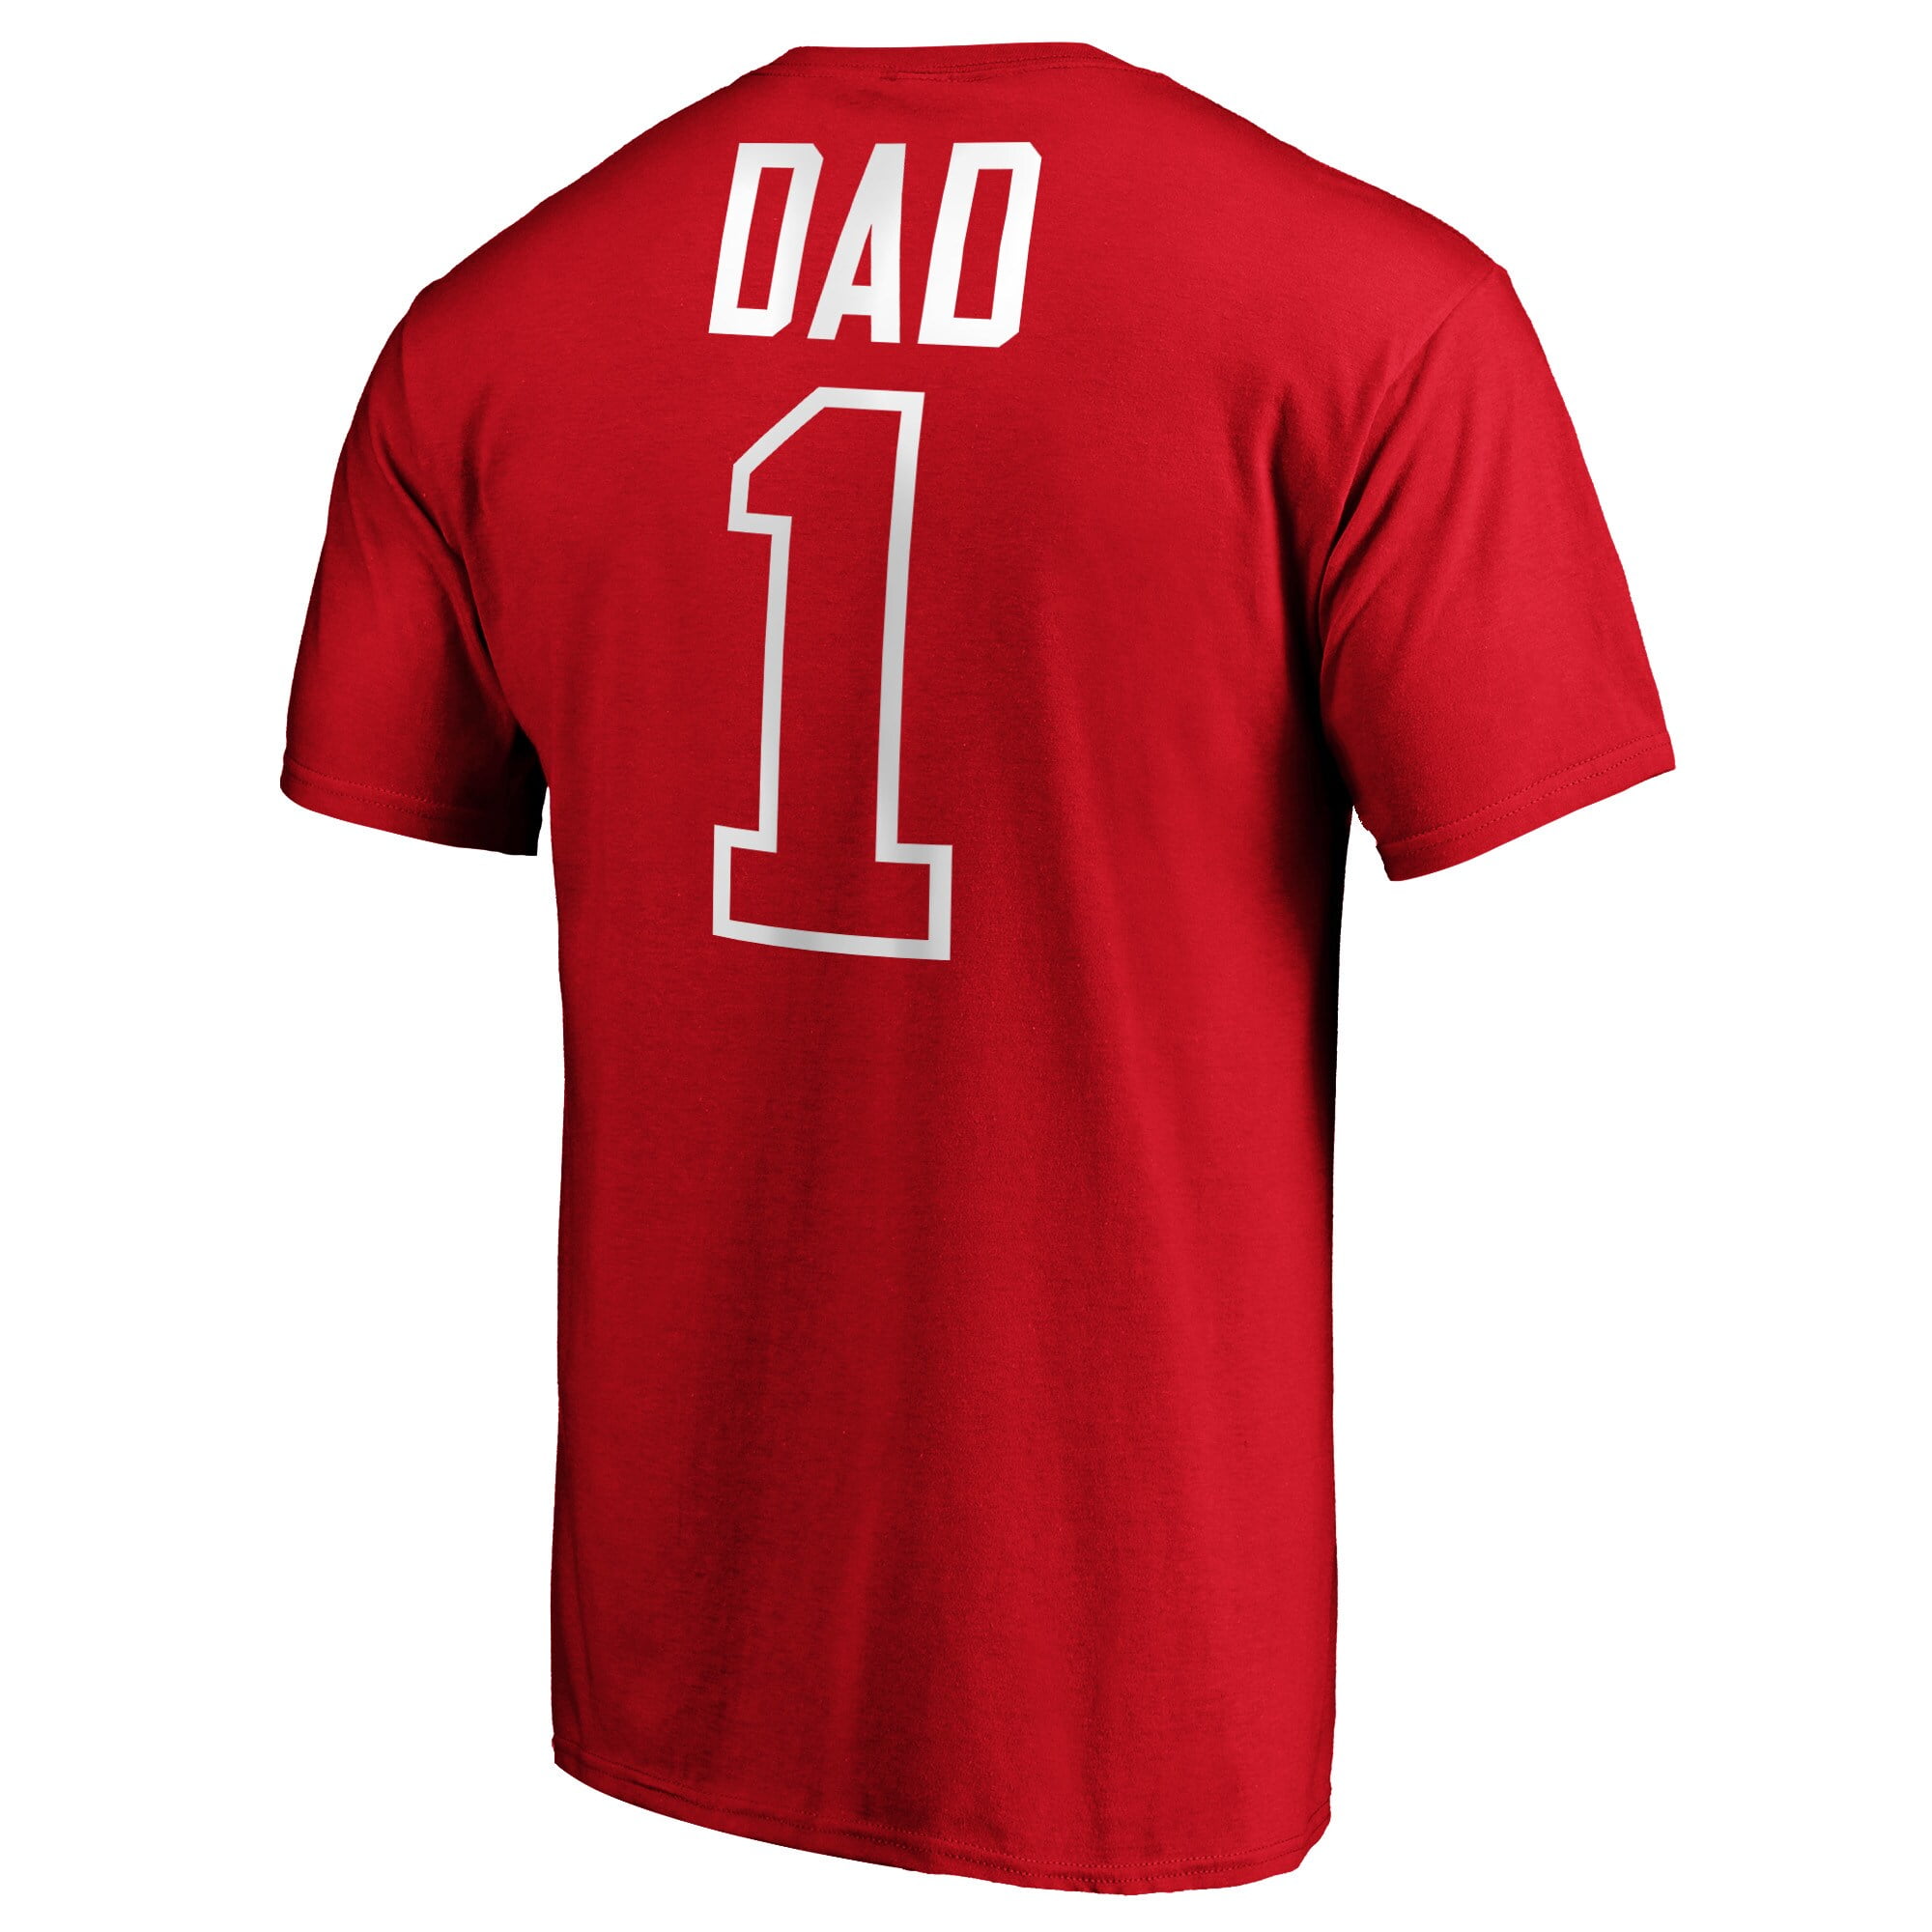 phillies father's day jersey